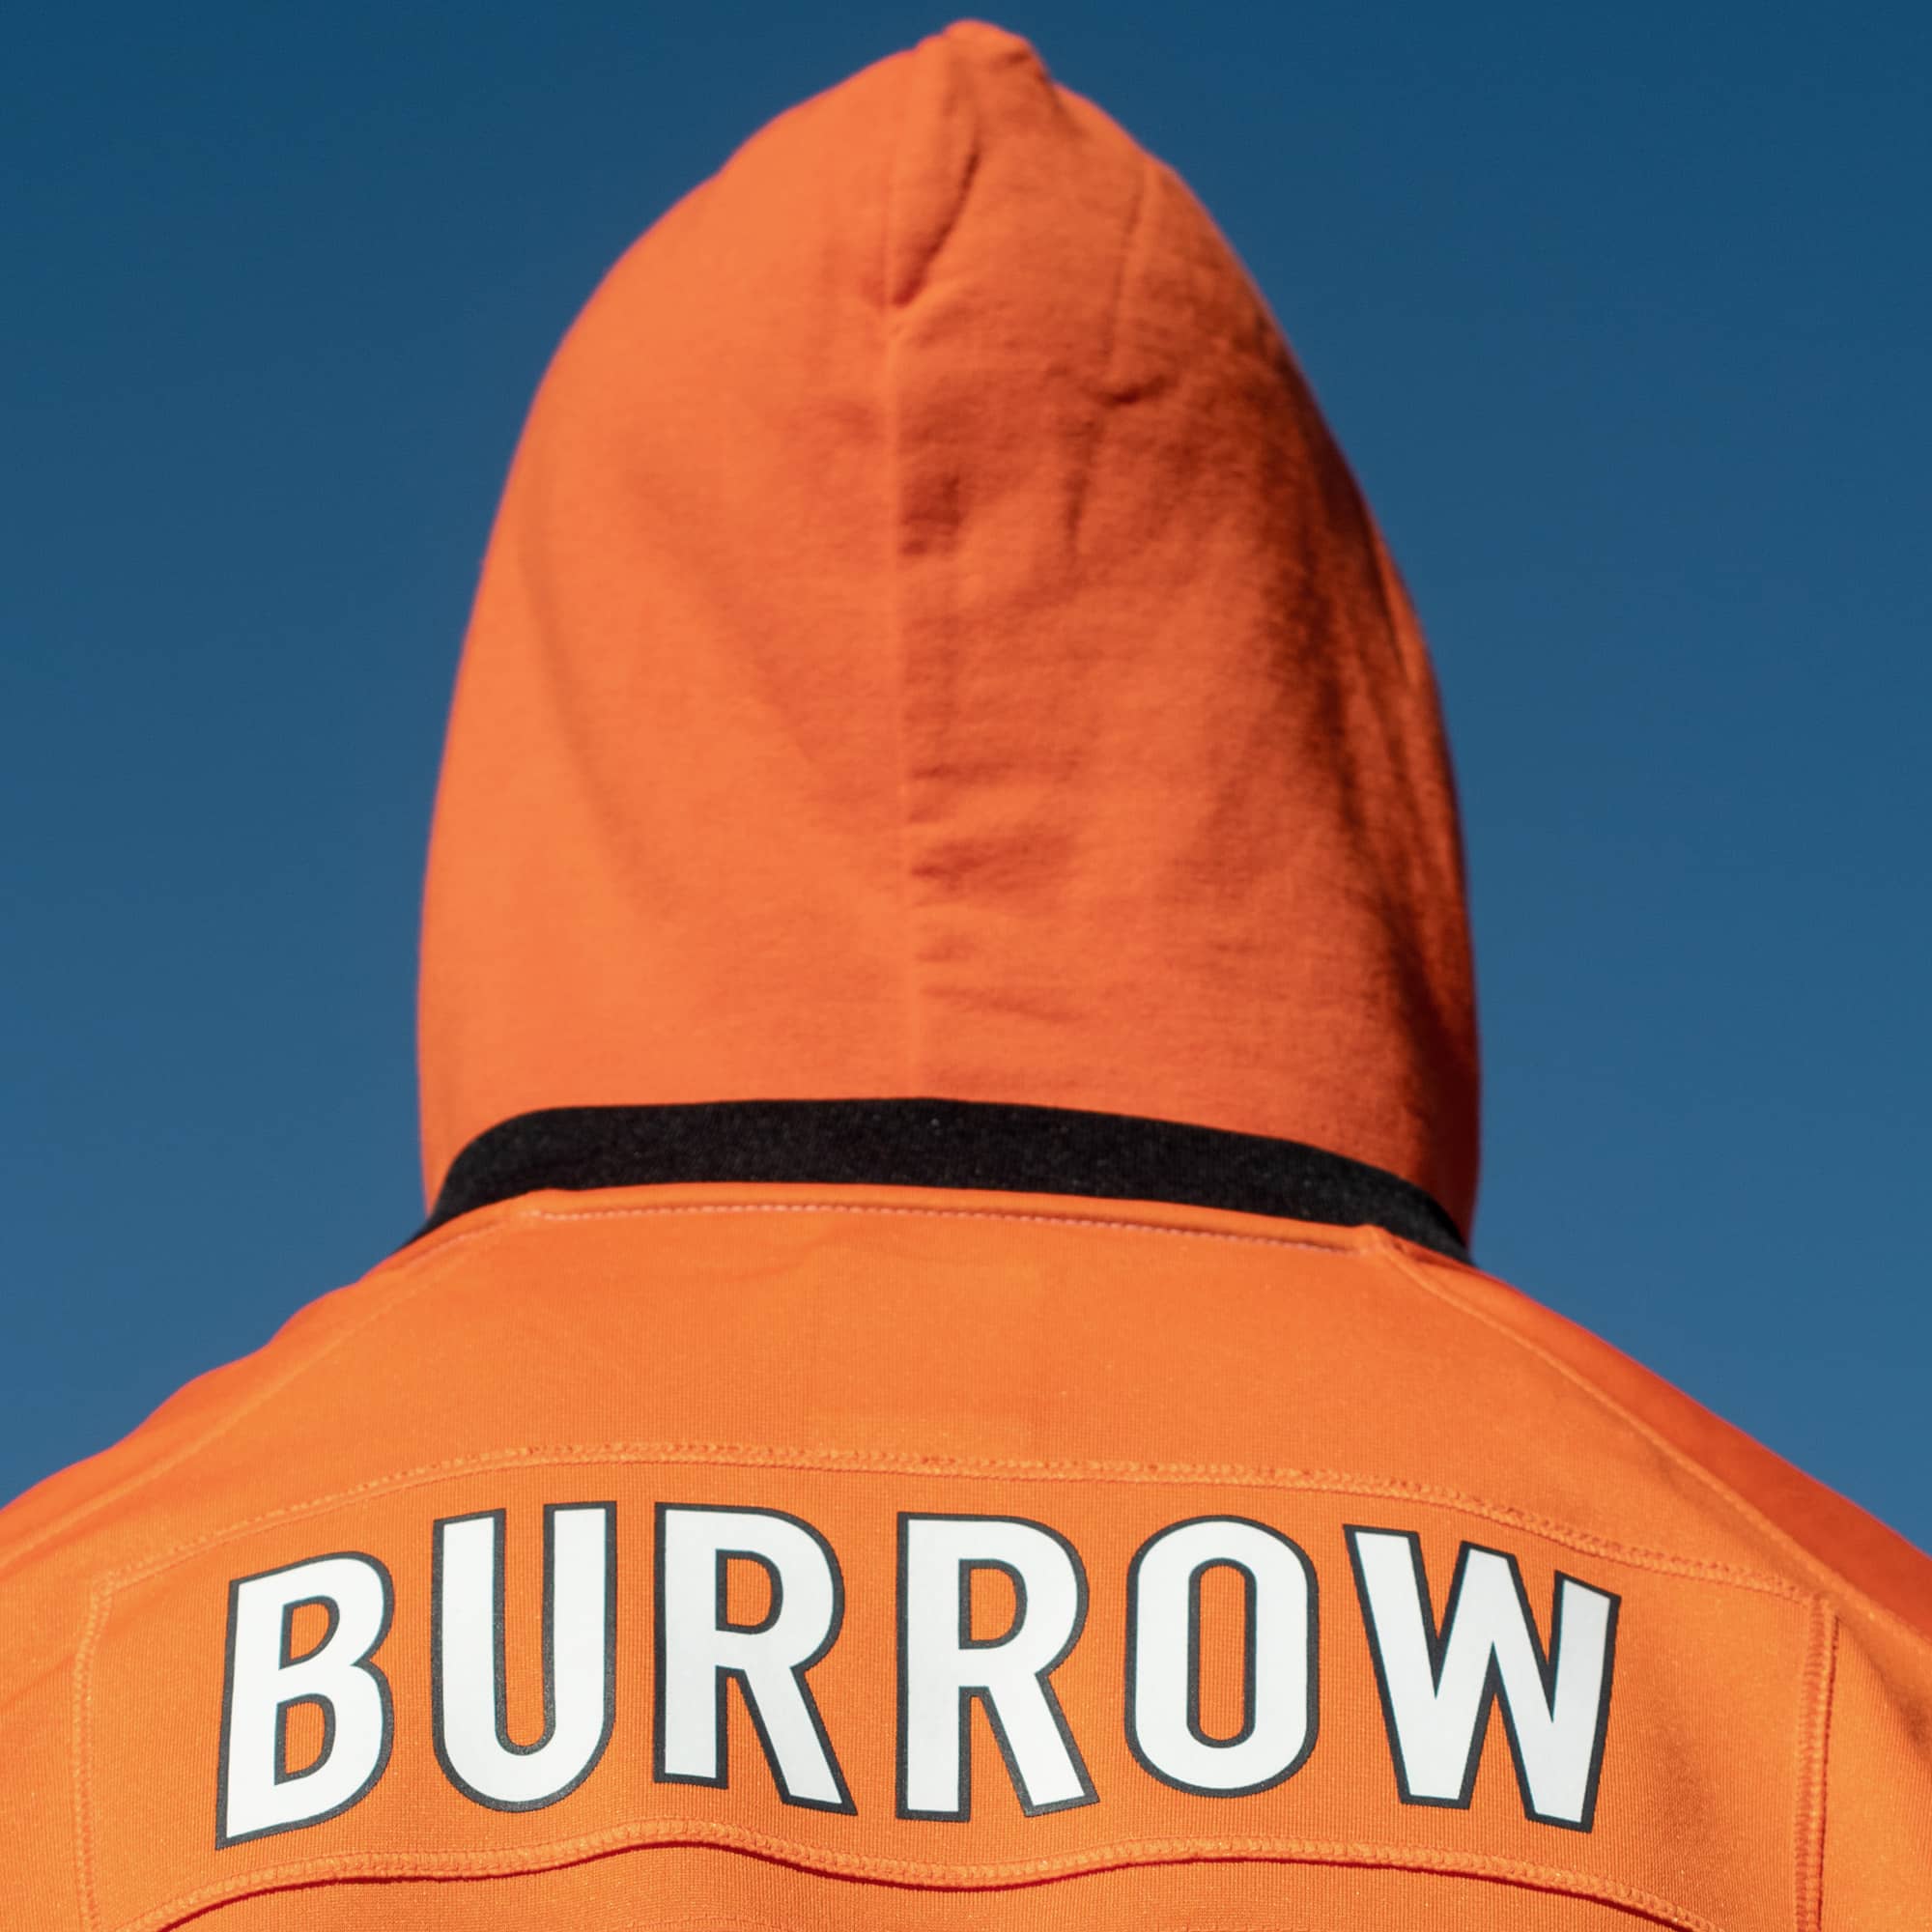 Burrow on the back of a hoodie